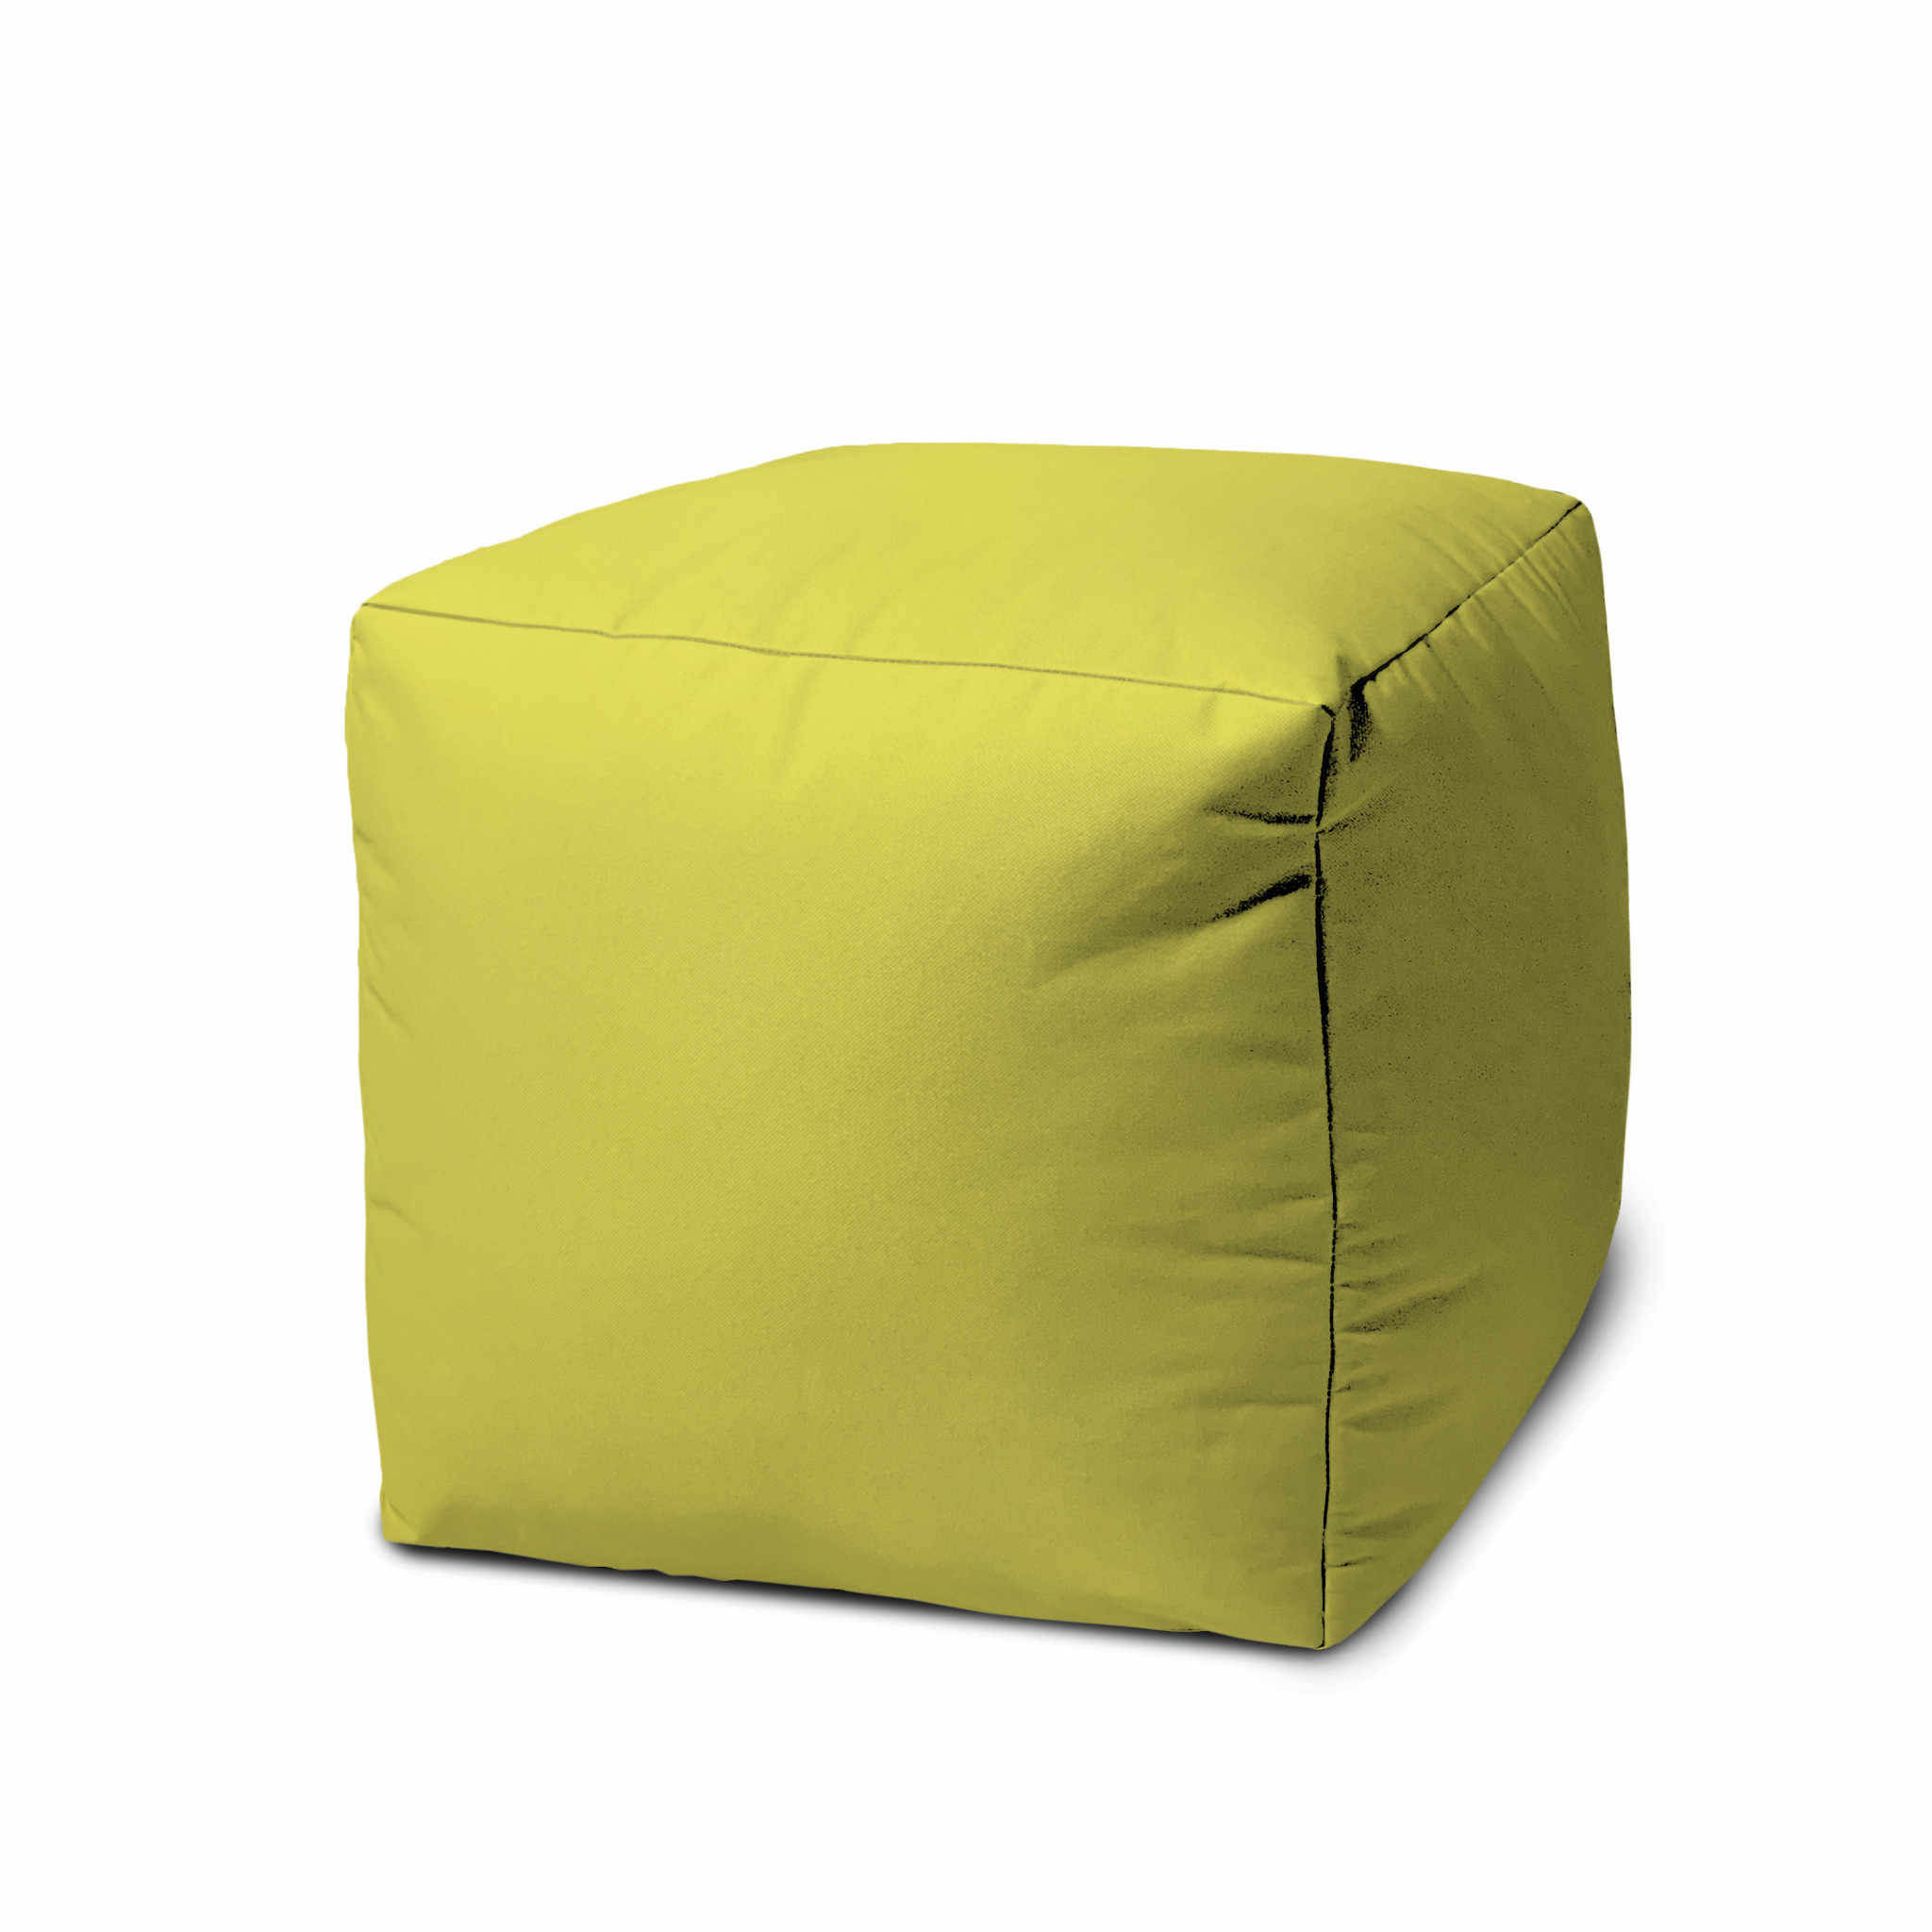 17 Cool Dark Mustard Yellow Solid Color Indoor Outdoor Pouf Cover